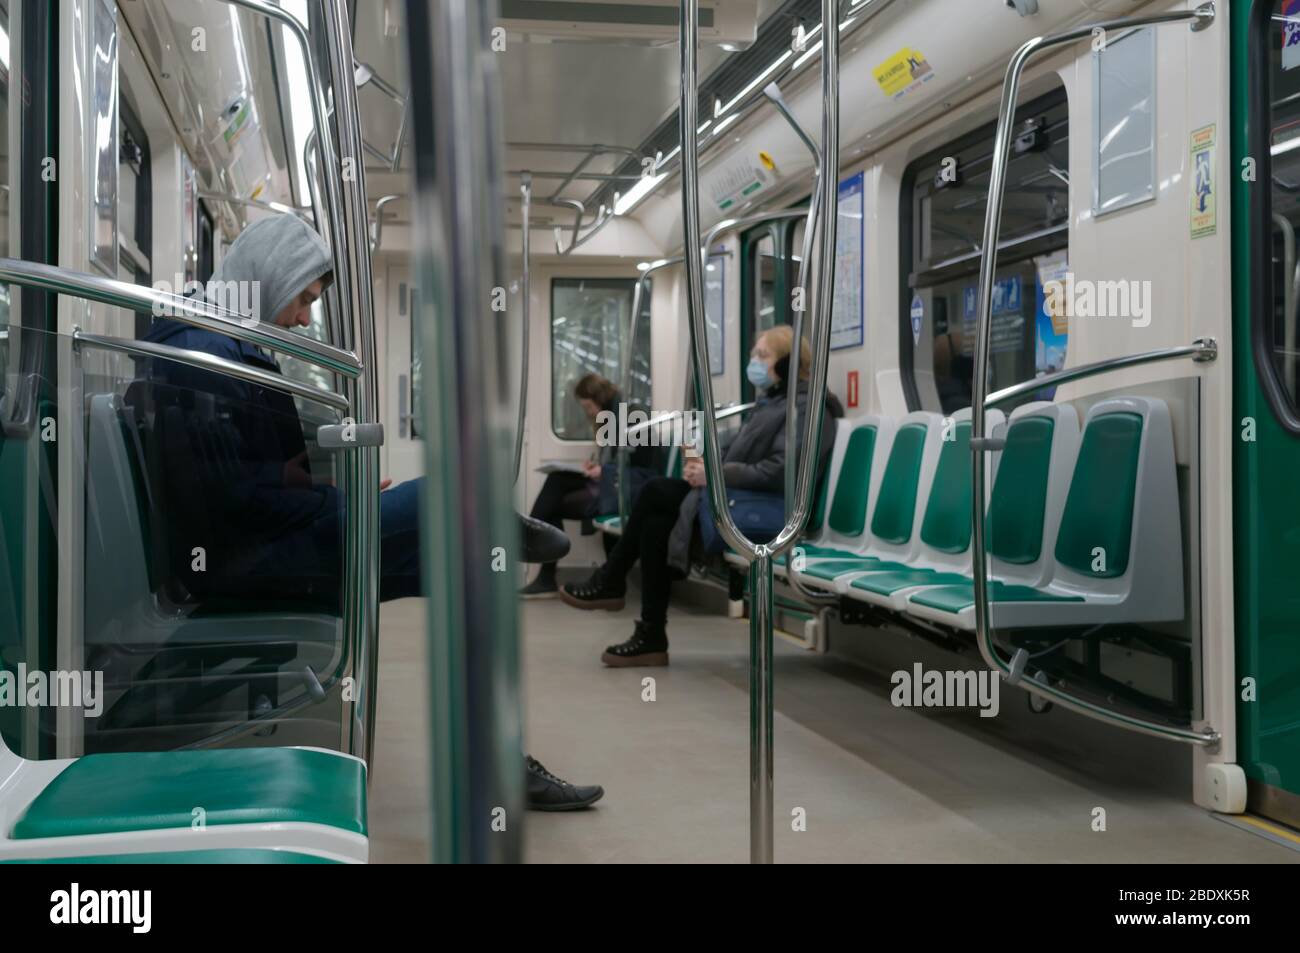 St. Petersburg, Russia - 04.01.2020: in the subway car during the period of the coronavirus epidemic Stock Photo